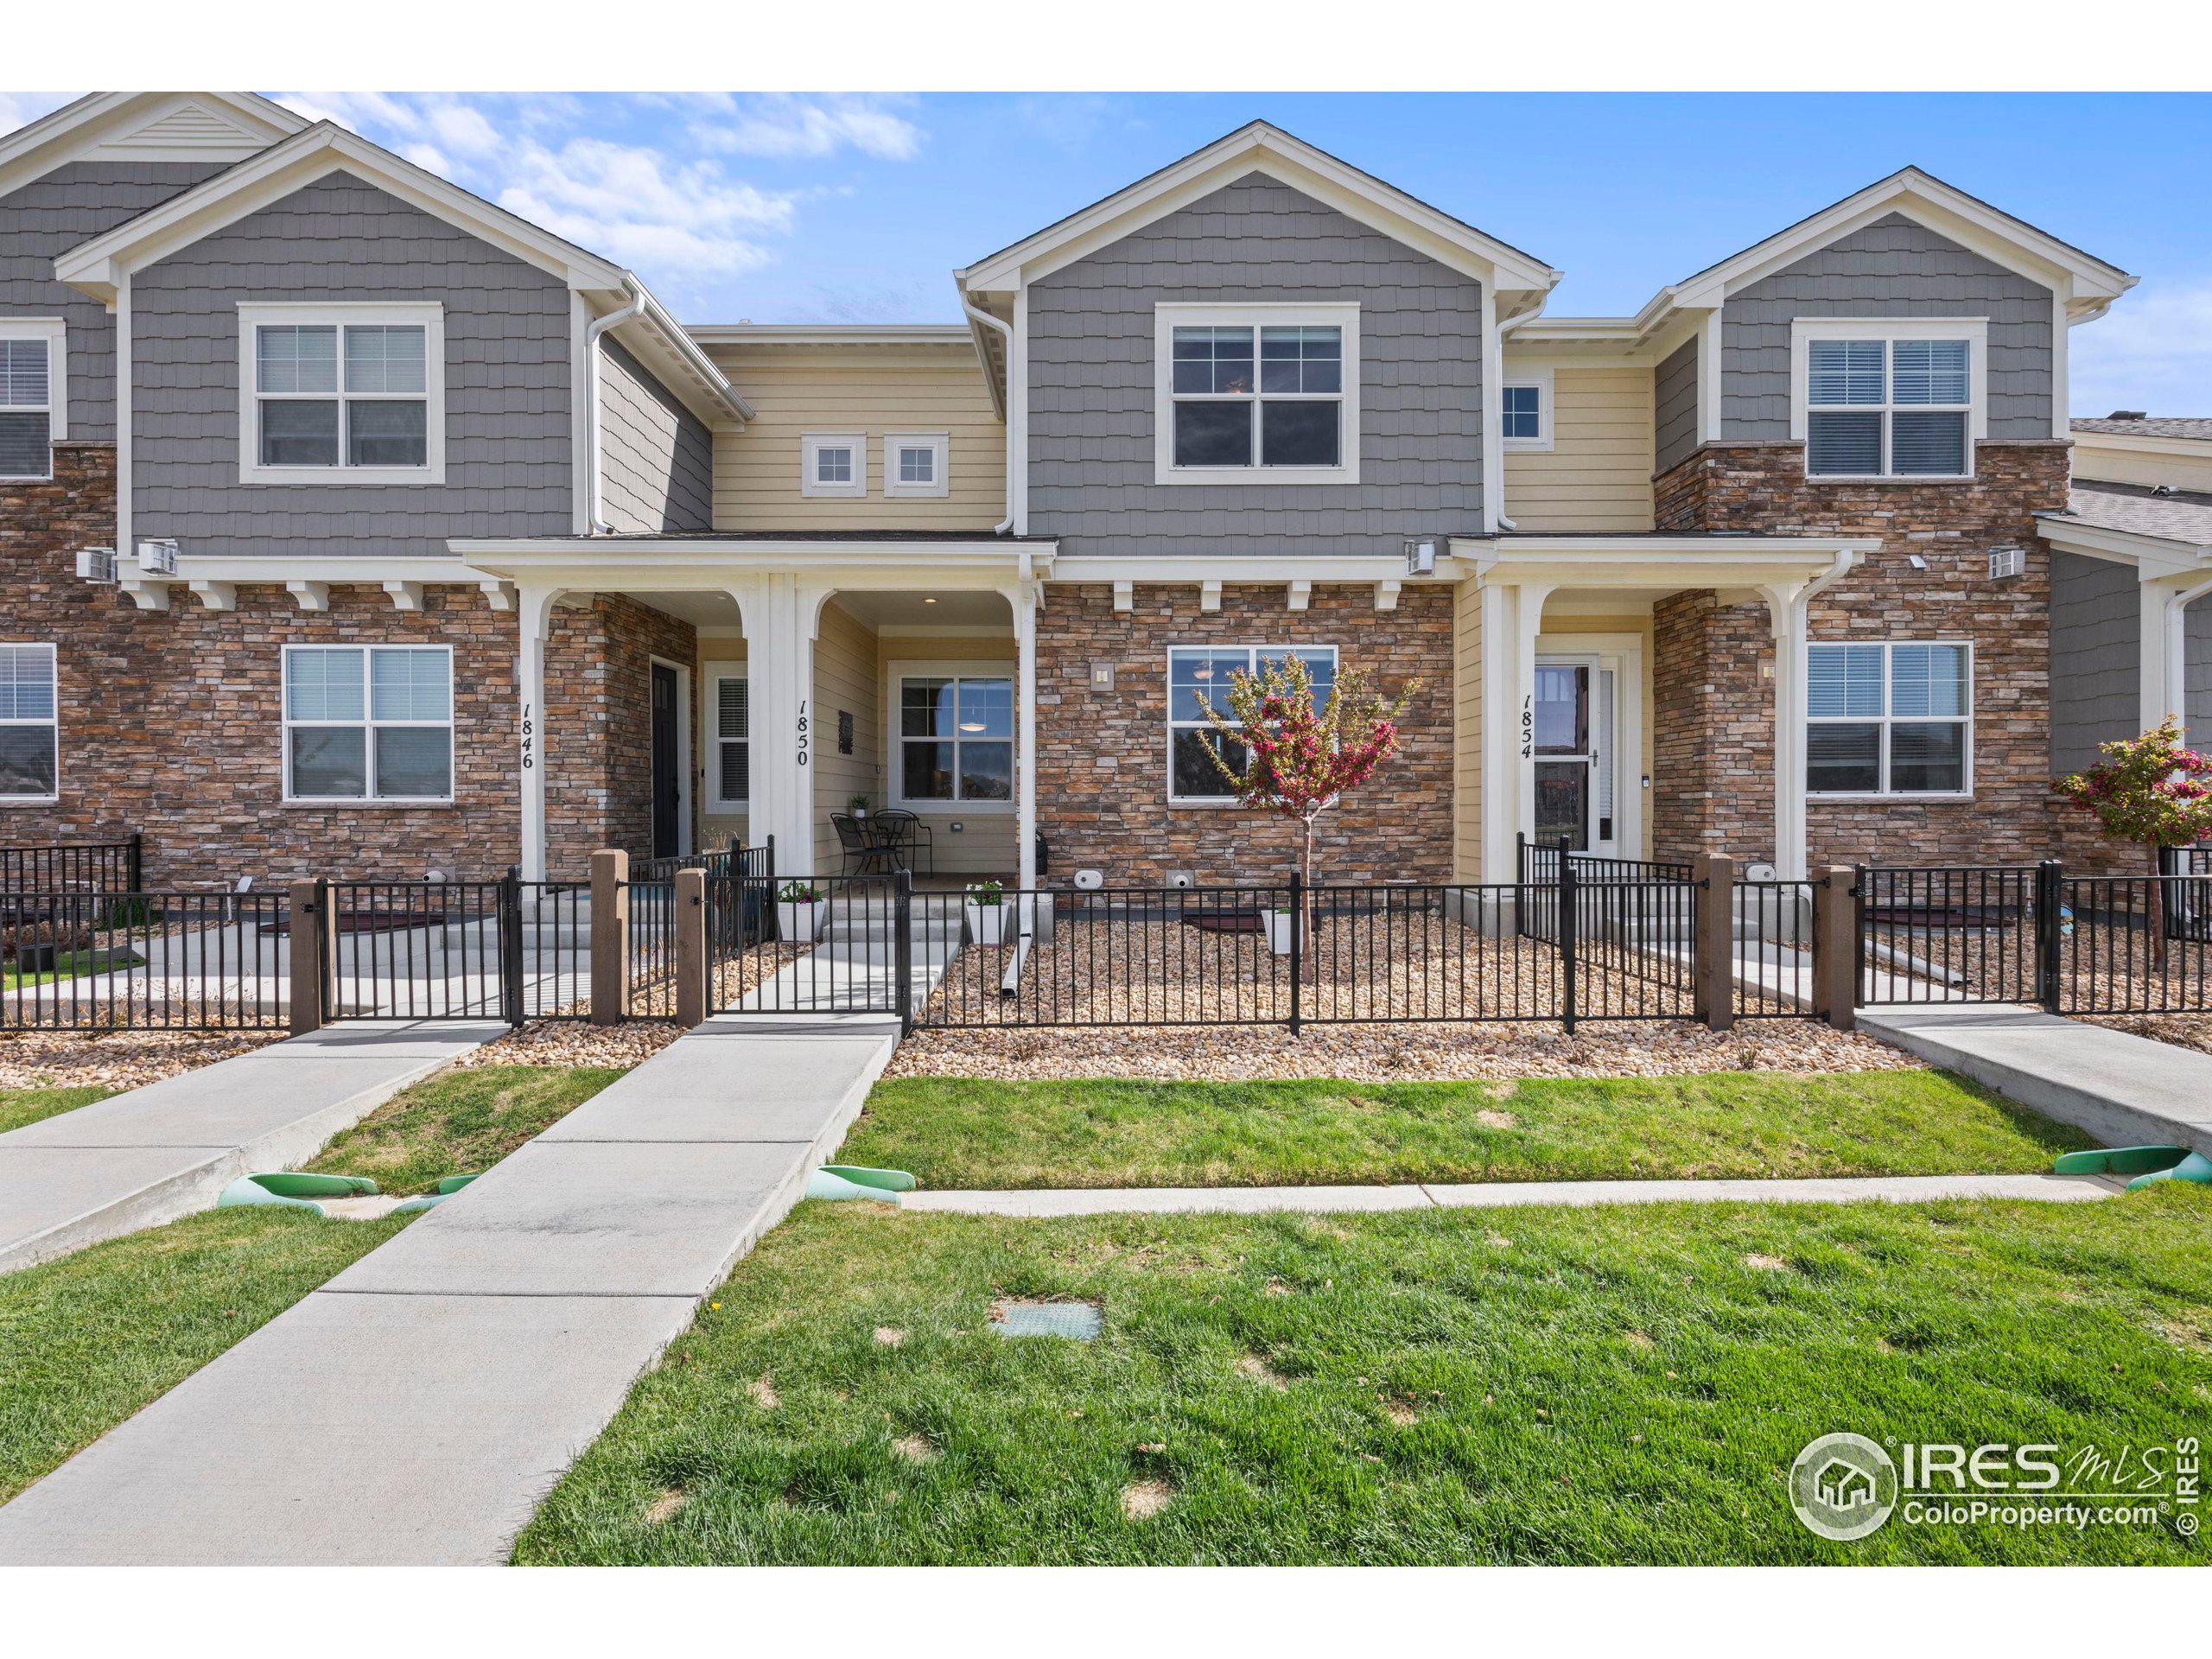 View Loveland, CO 80538 townhome